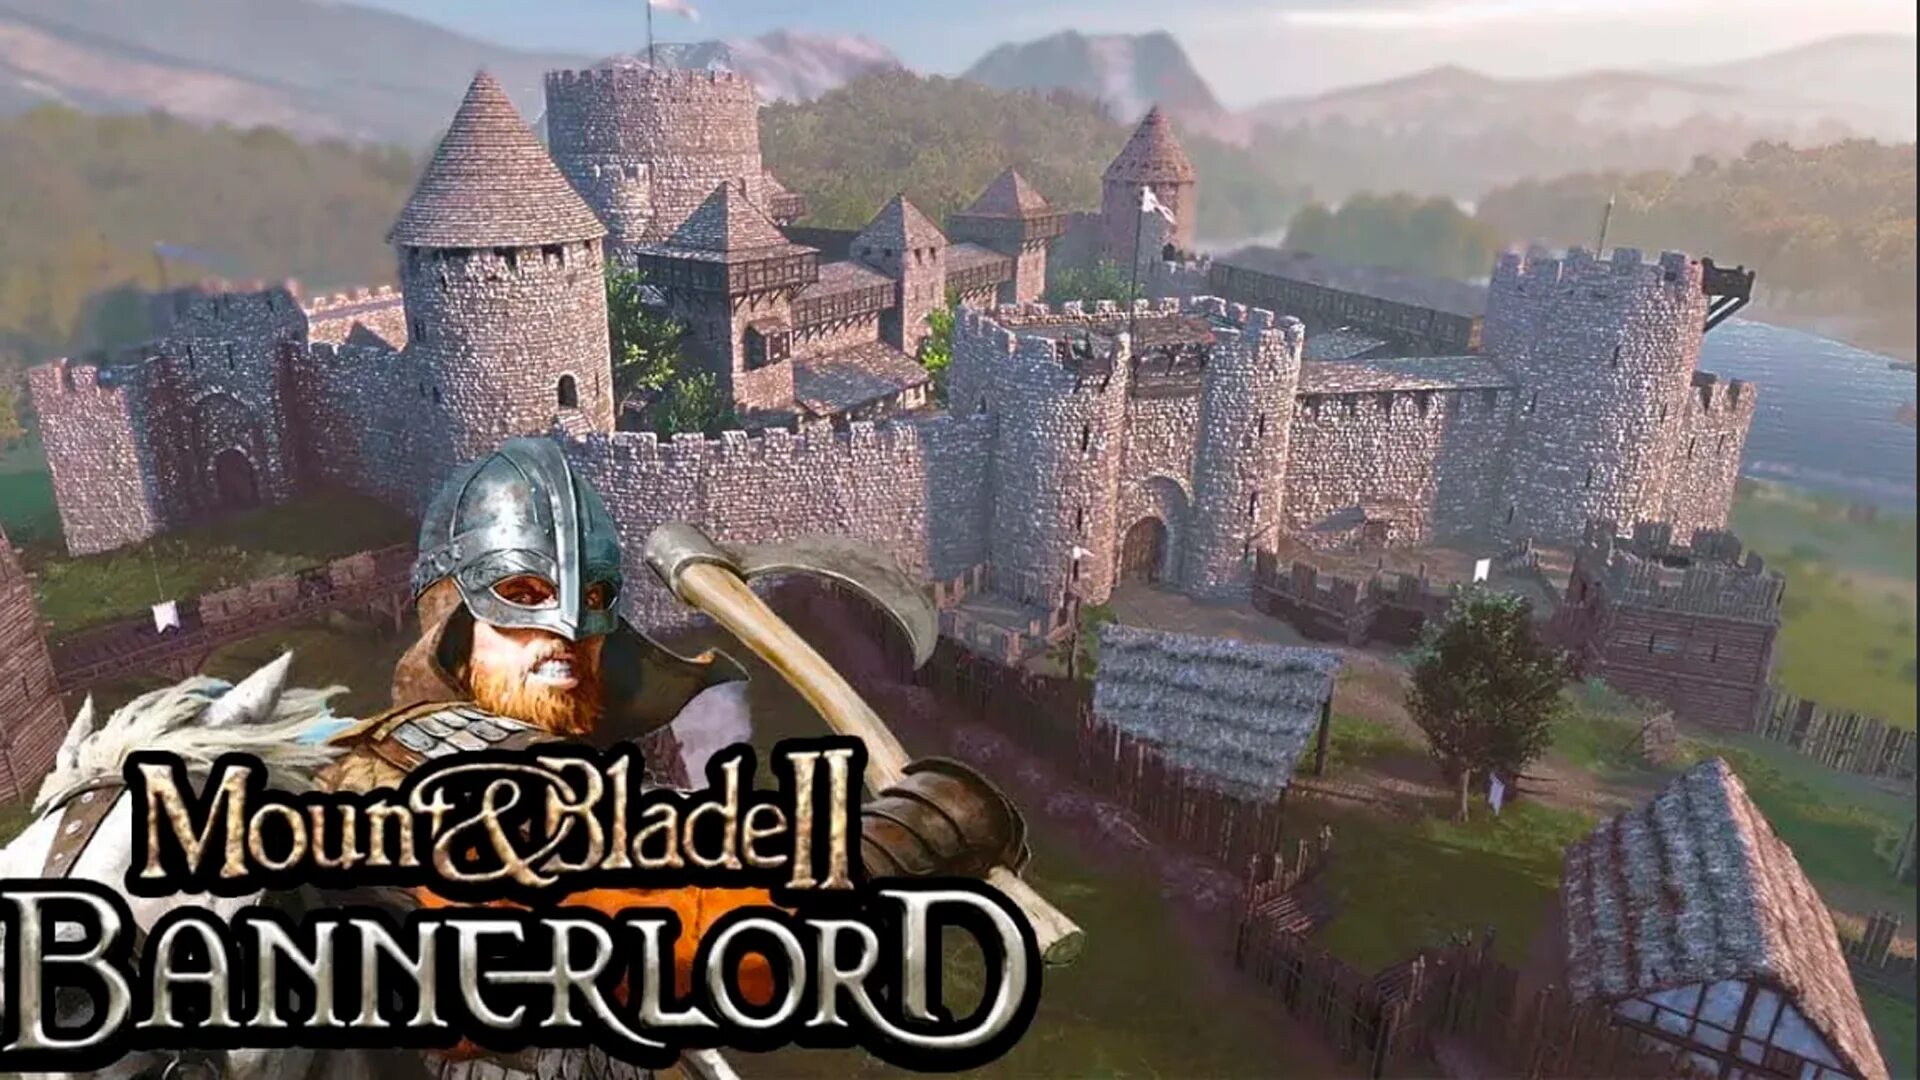 Bannerlord 2 замок. Mount and Blade 2. Mount and Blade 2 замки. Mount and Blade 2 Bannerlord замки. Замок в Mount & Blade II: Bannerlord.